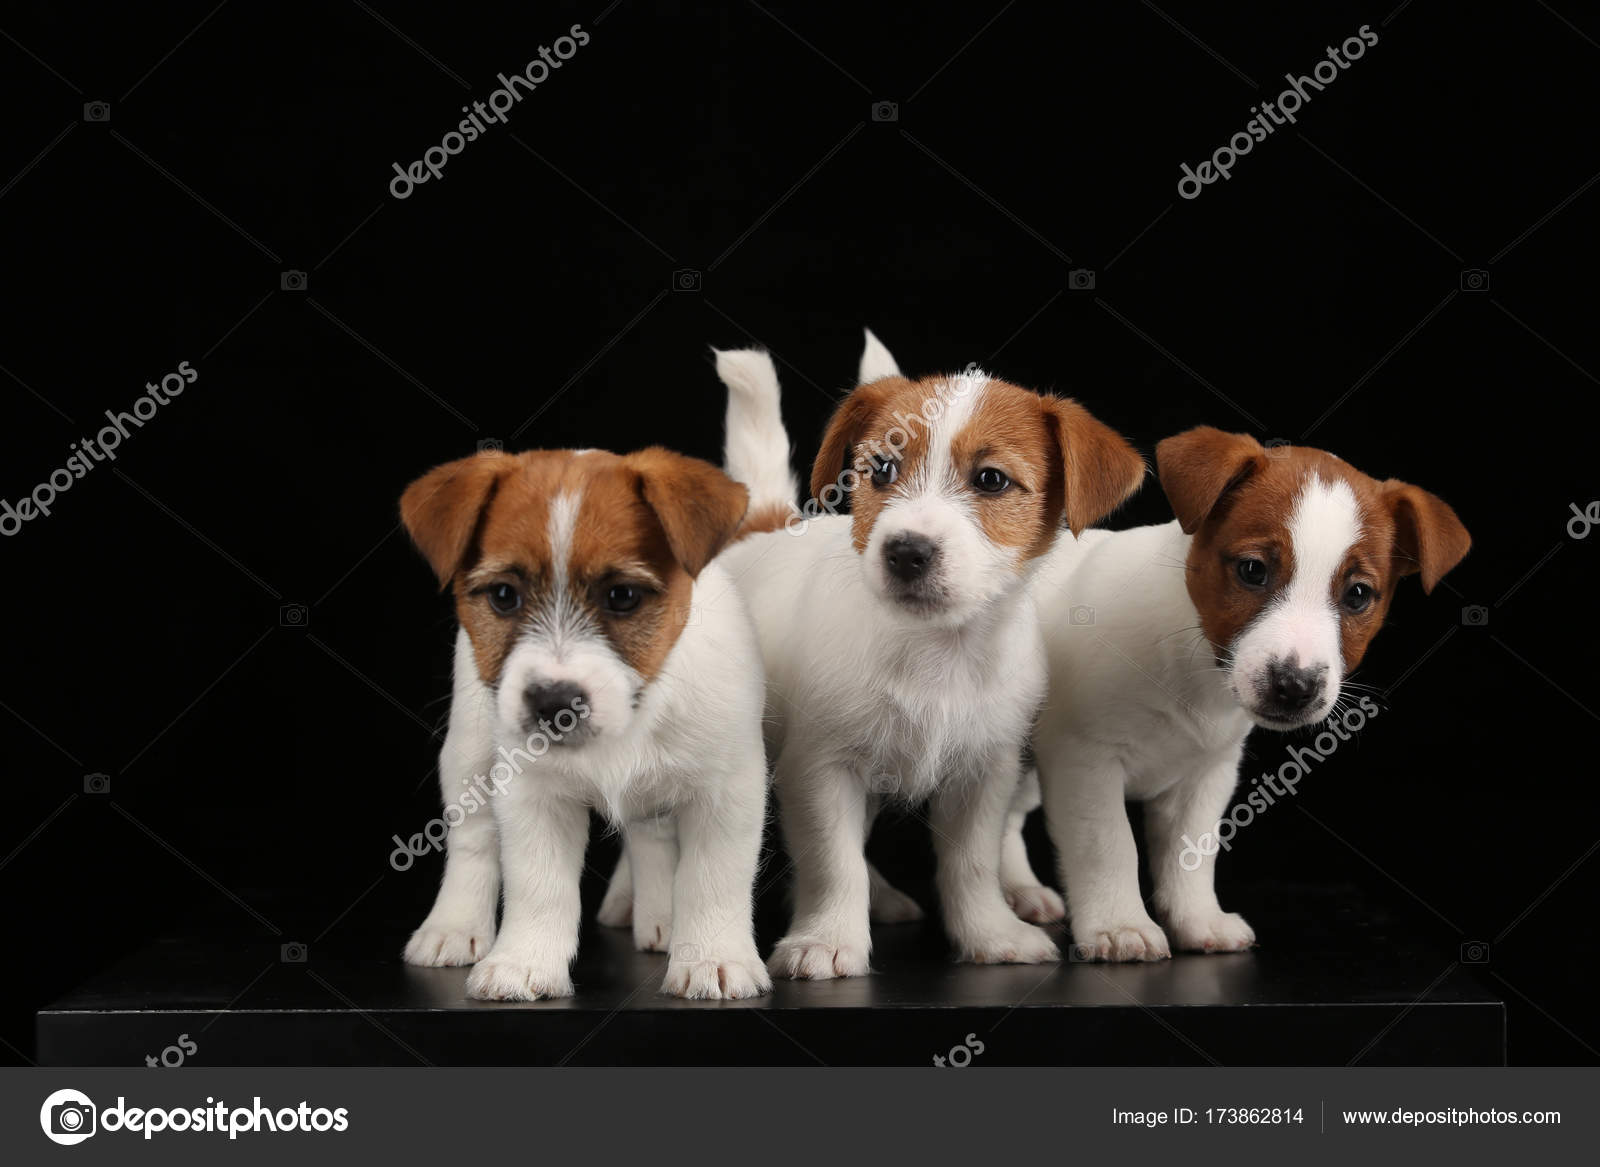 Pictures Baby Jack Russell Terrier Cute Jack Russell Terriers Babies Close Up Black Background Stock Photo C Kazanovskyiphoto Gmail Com 173862814